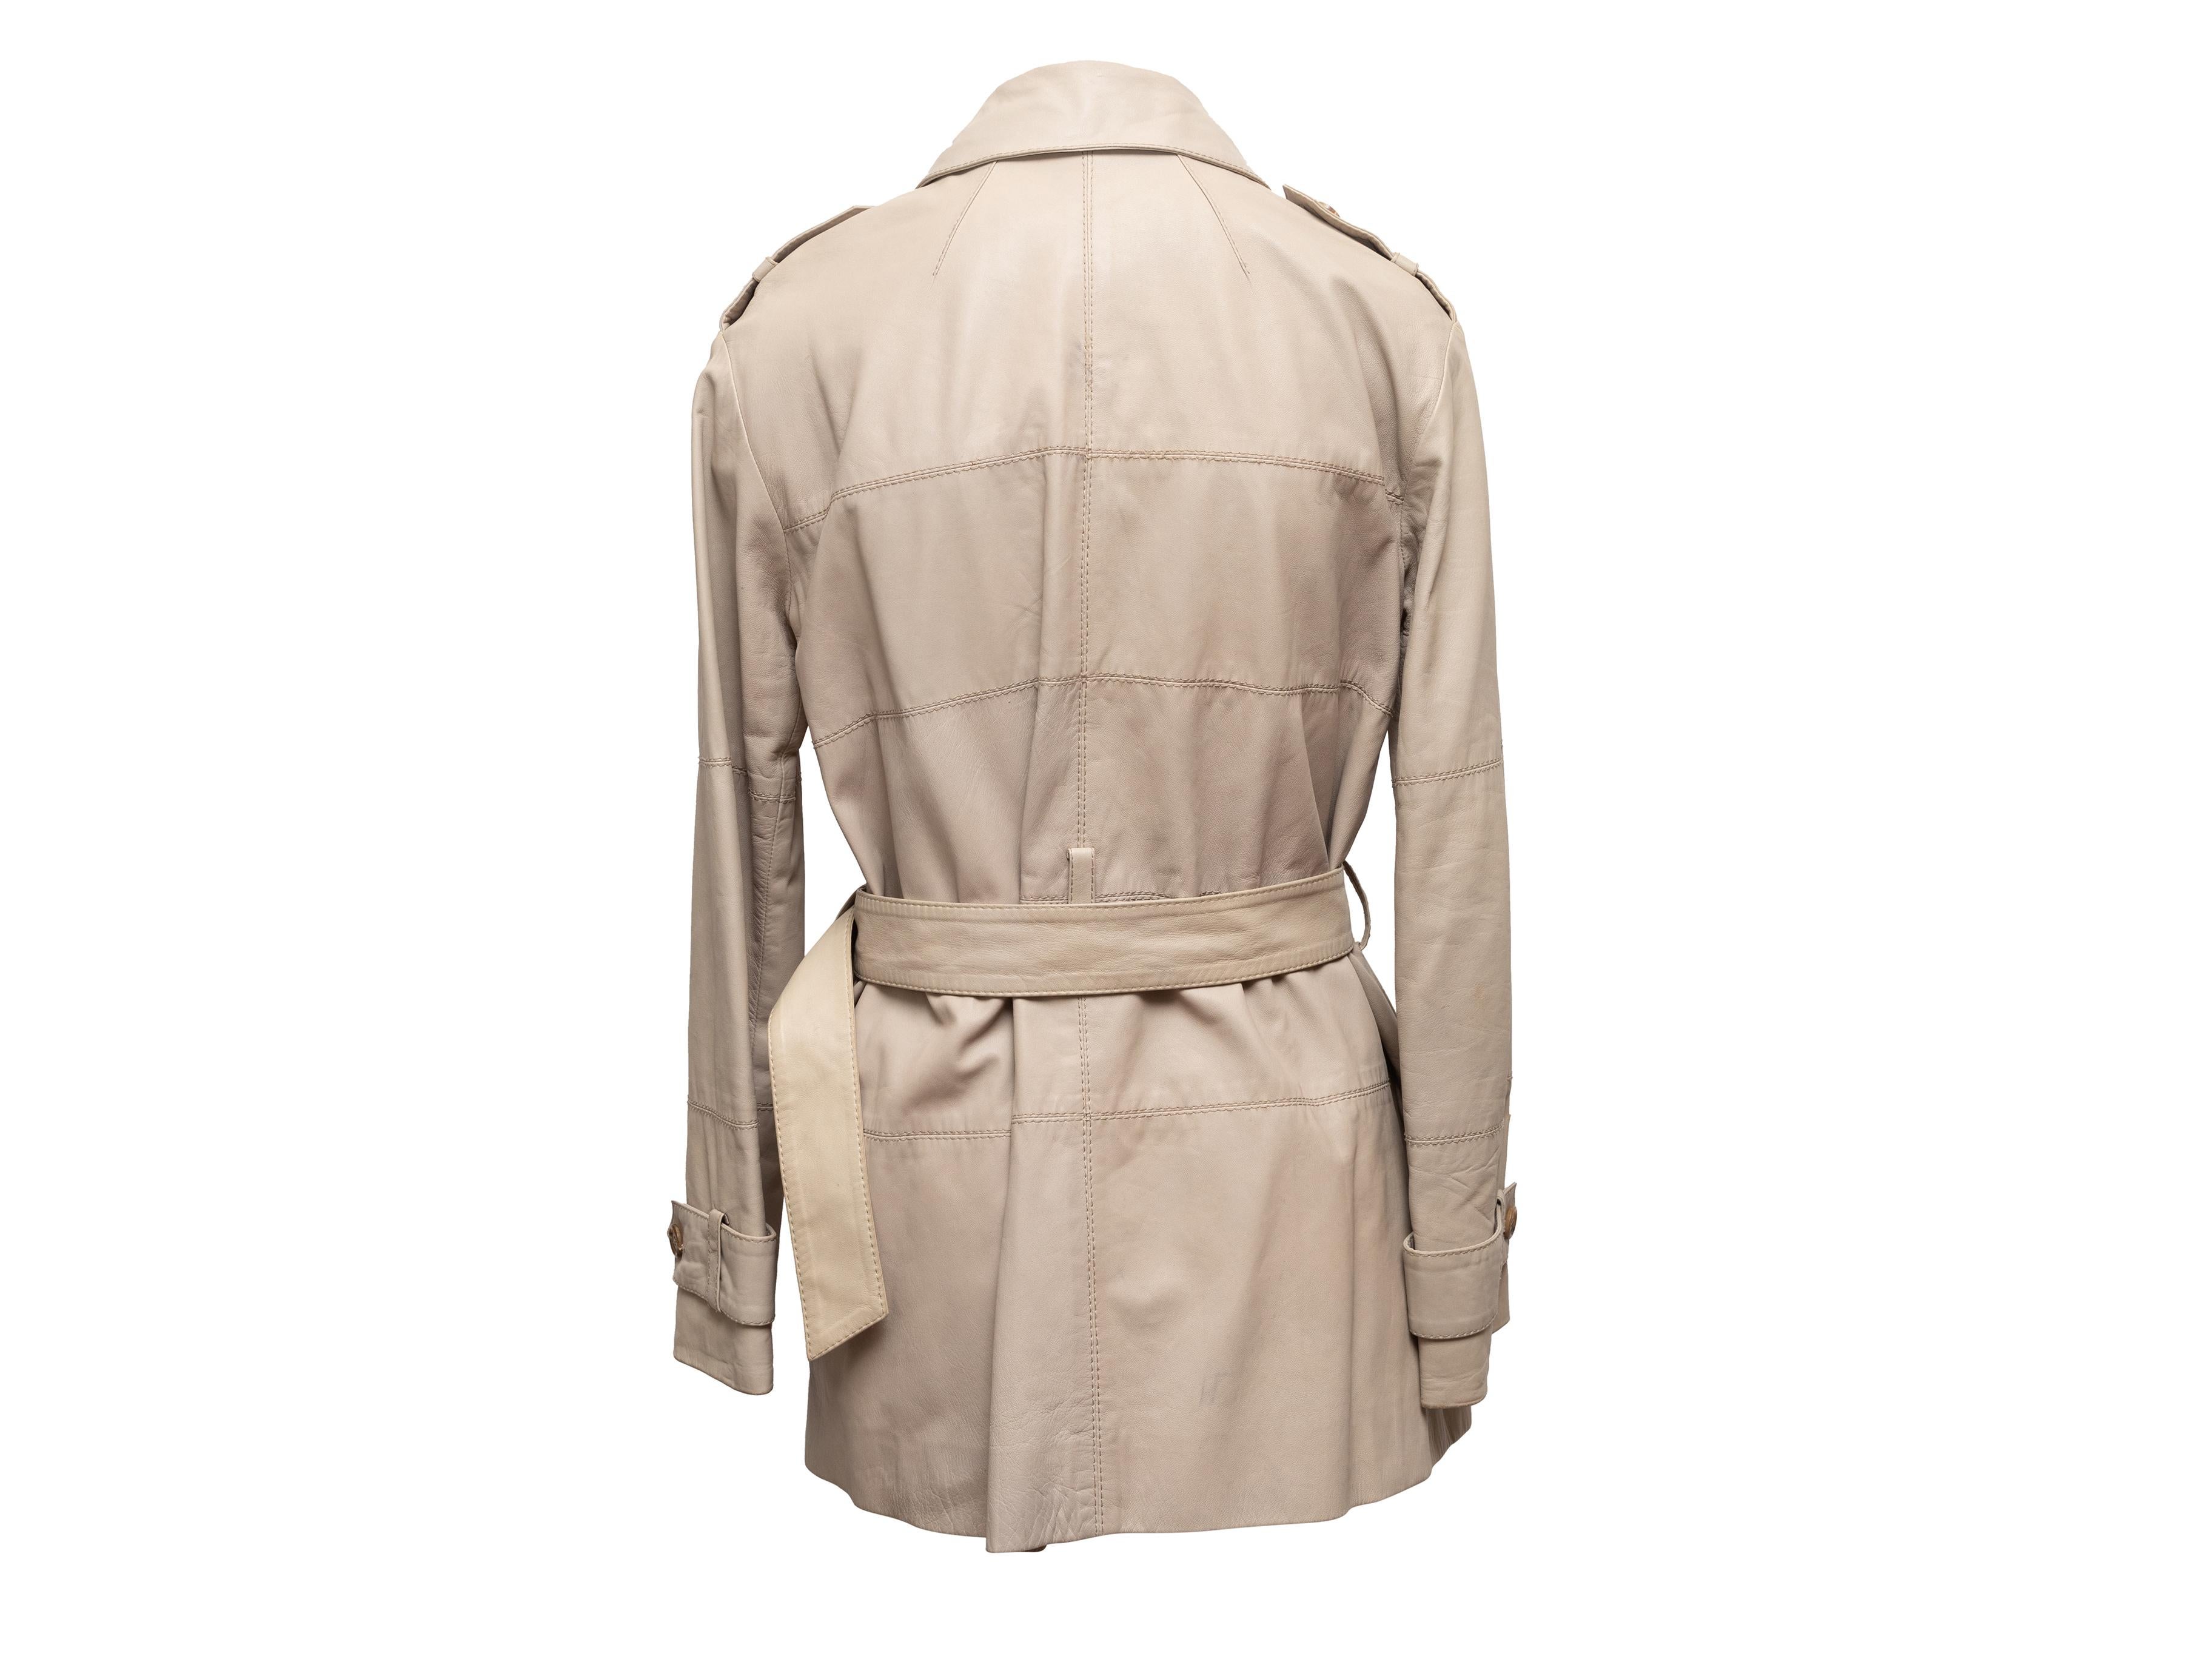 Beige lambskin leather trench coat by Louis Vuitton. Circa early 2000s. Pointed collar. Belt at waist. Button closures at center front. Designer size 38. 36